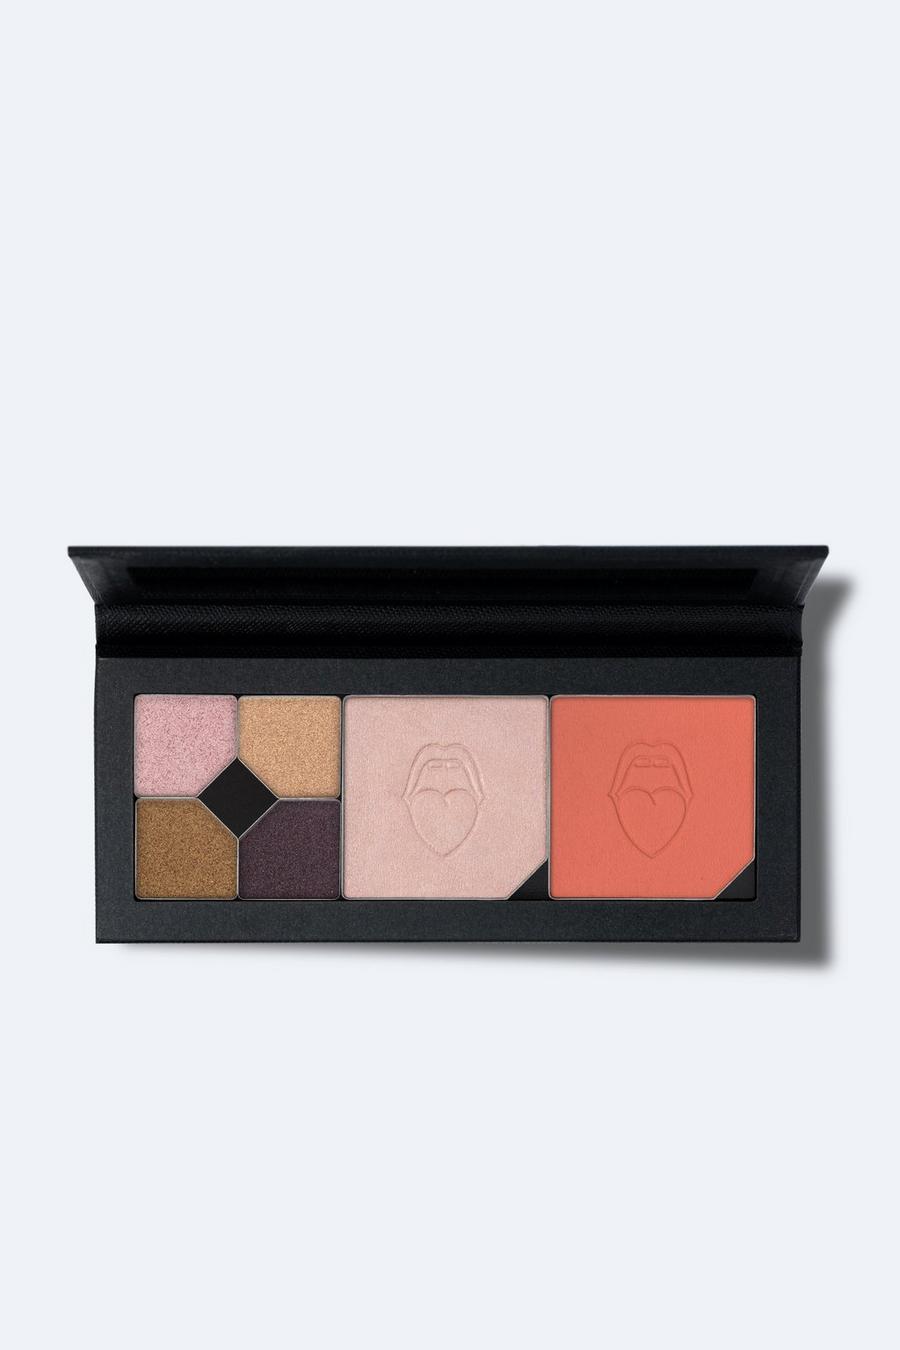 Nasty Gal Beauty Cream Highlighter Face and Eye Palette